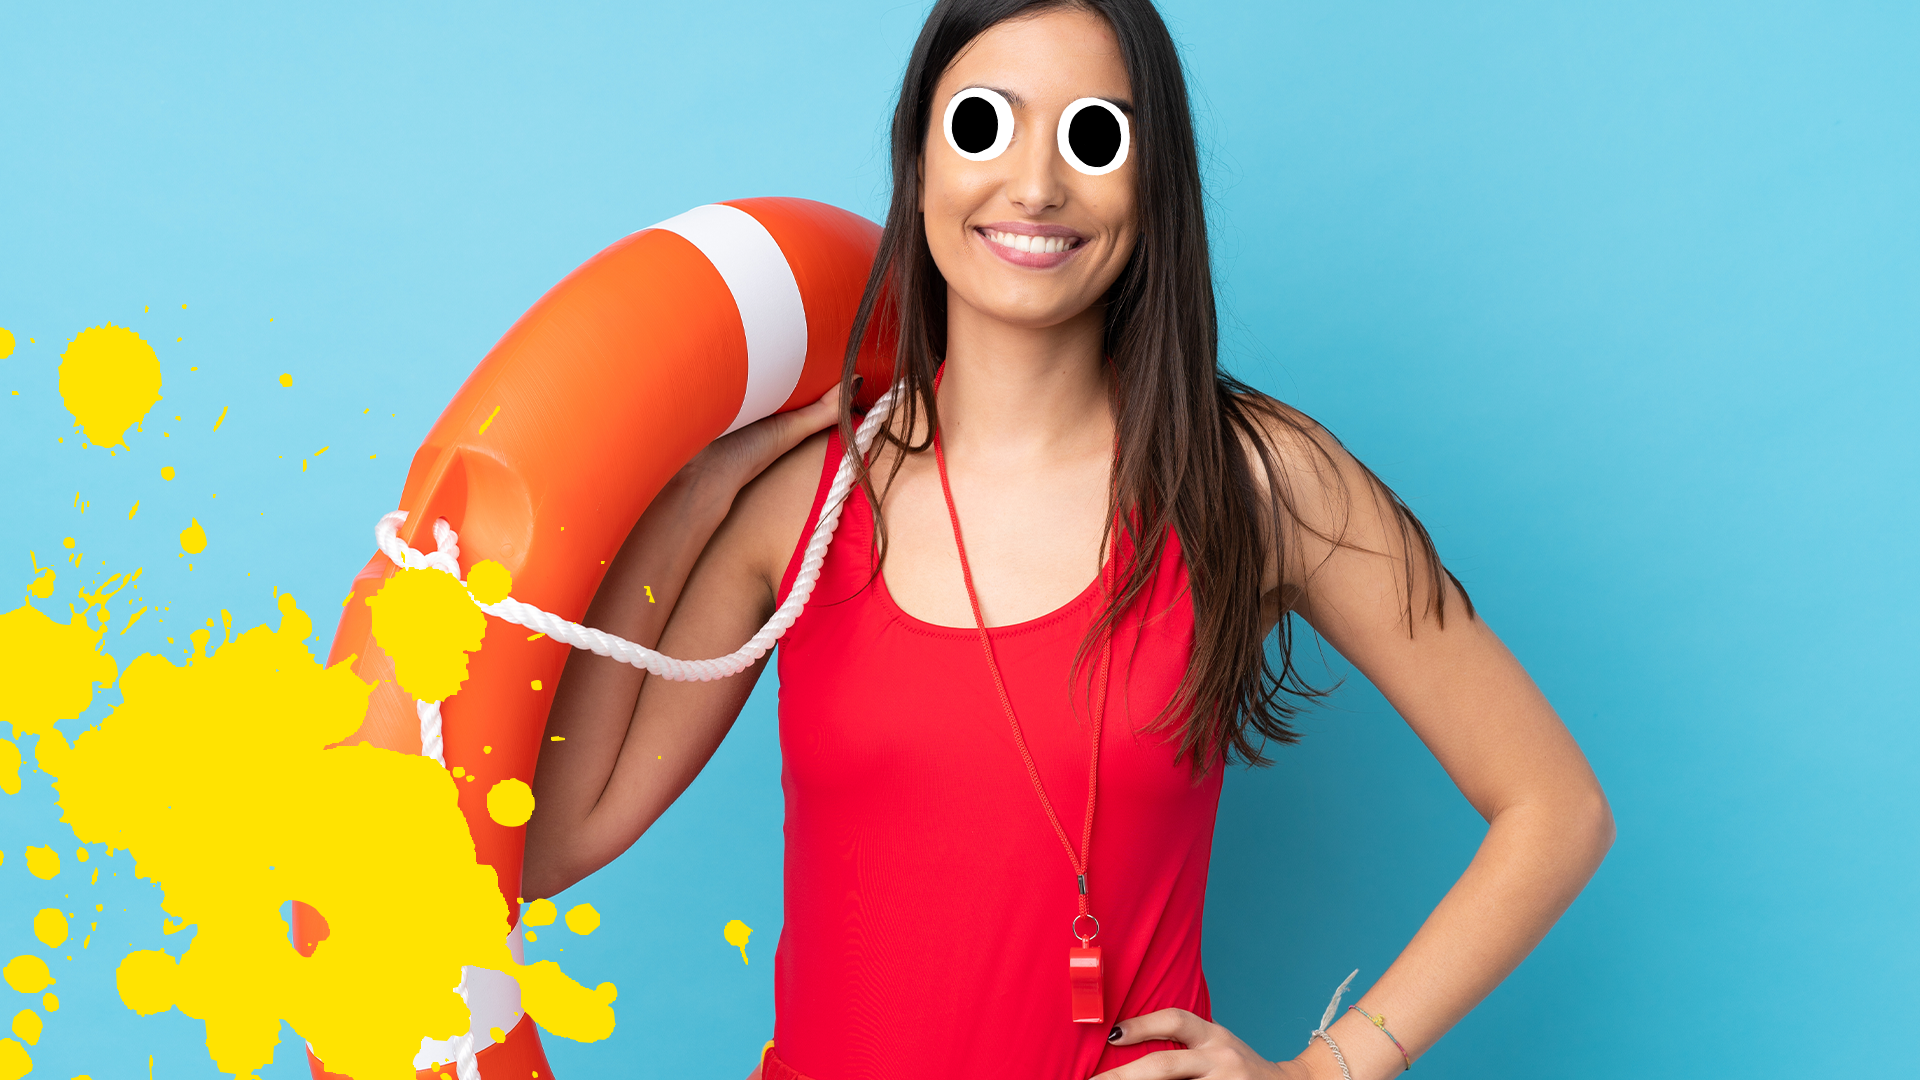 Female lifeguard on blue background with yellow splat